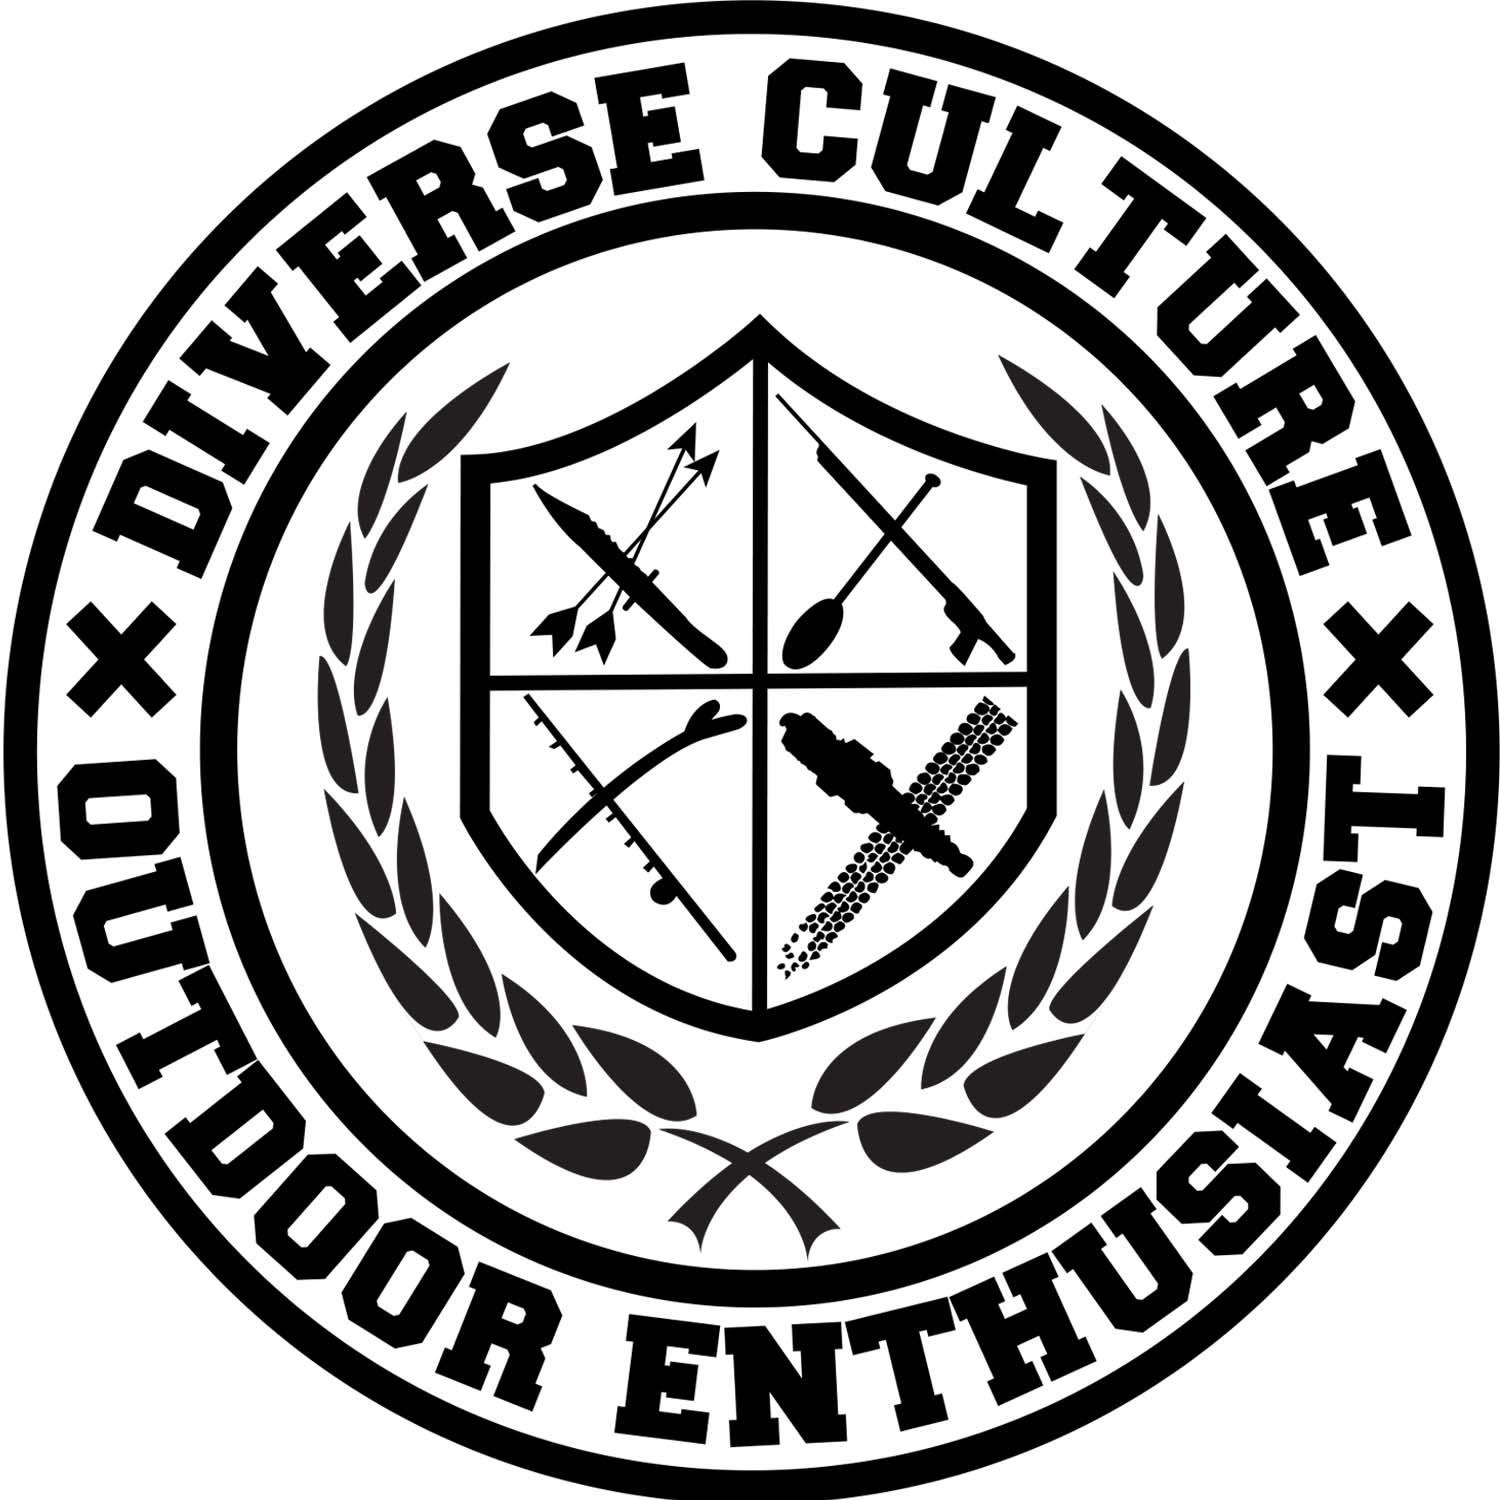 MISSION STATEMENT: DIVERSE CULTRE THE BRAND FOR OUTDOOR ENTHUSIAST